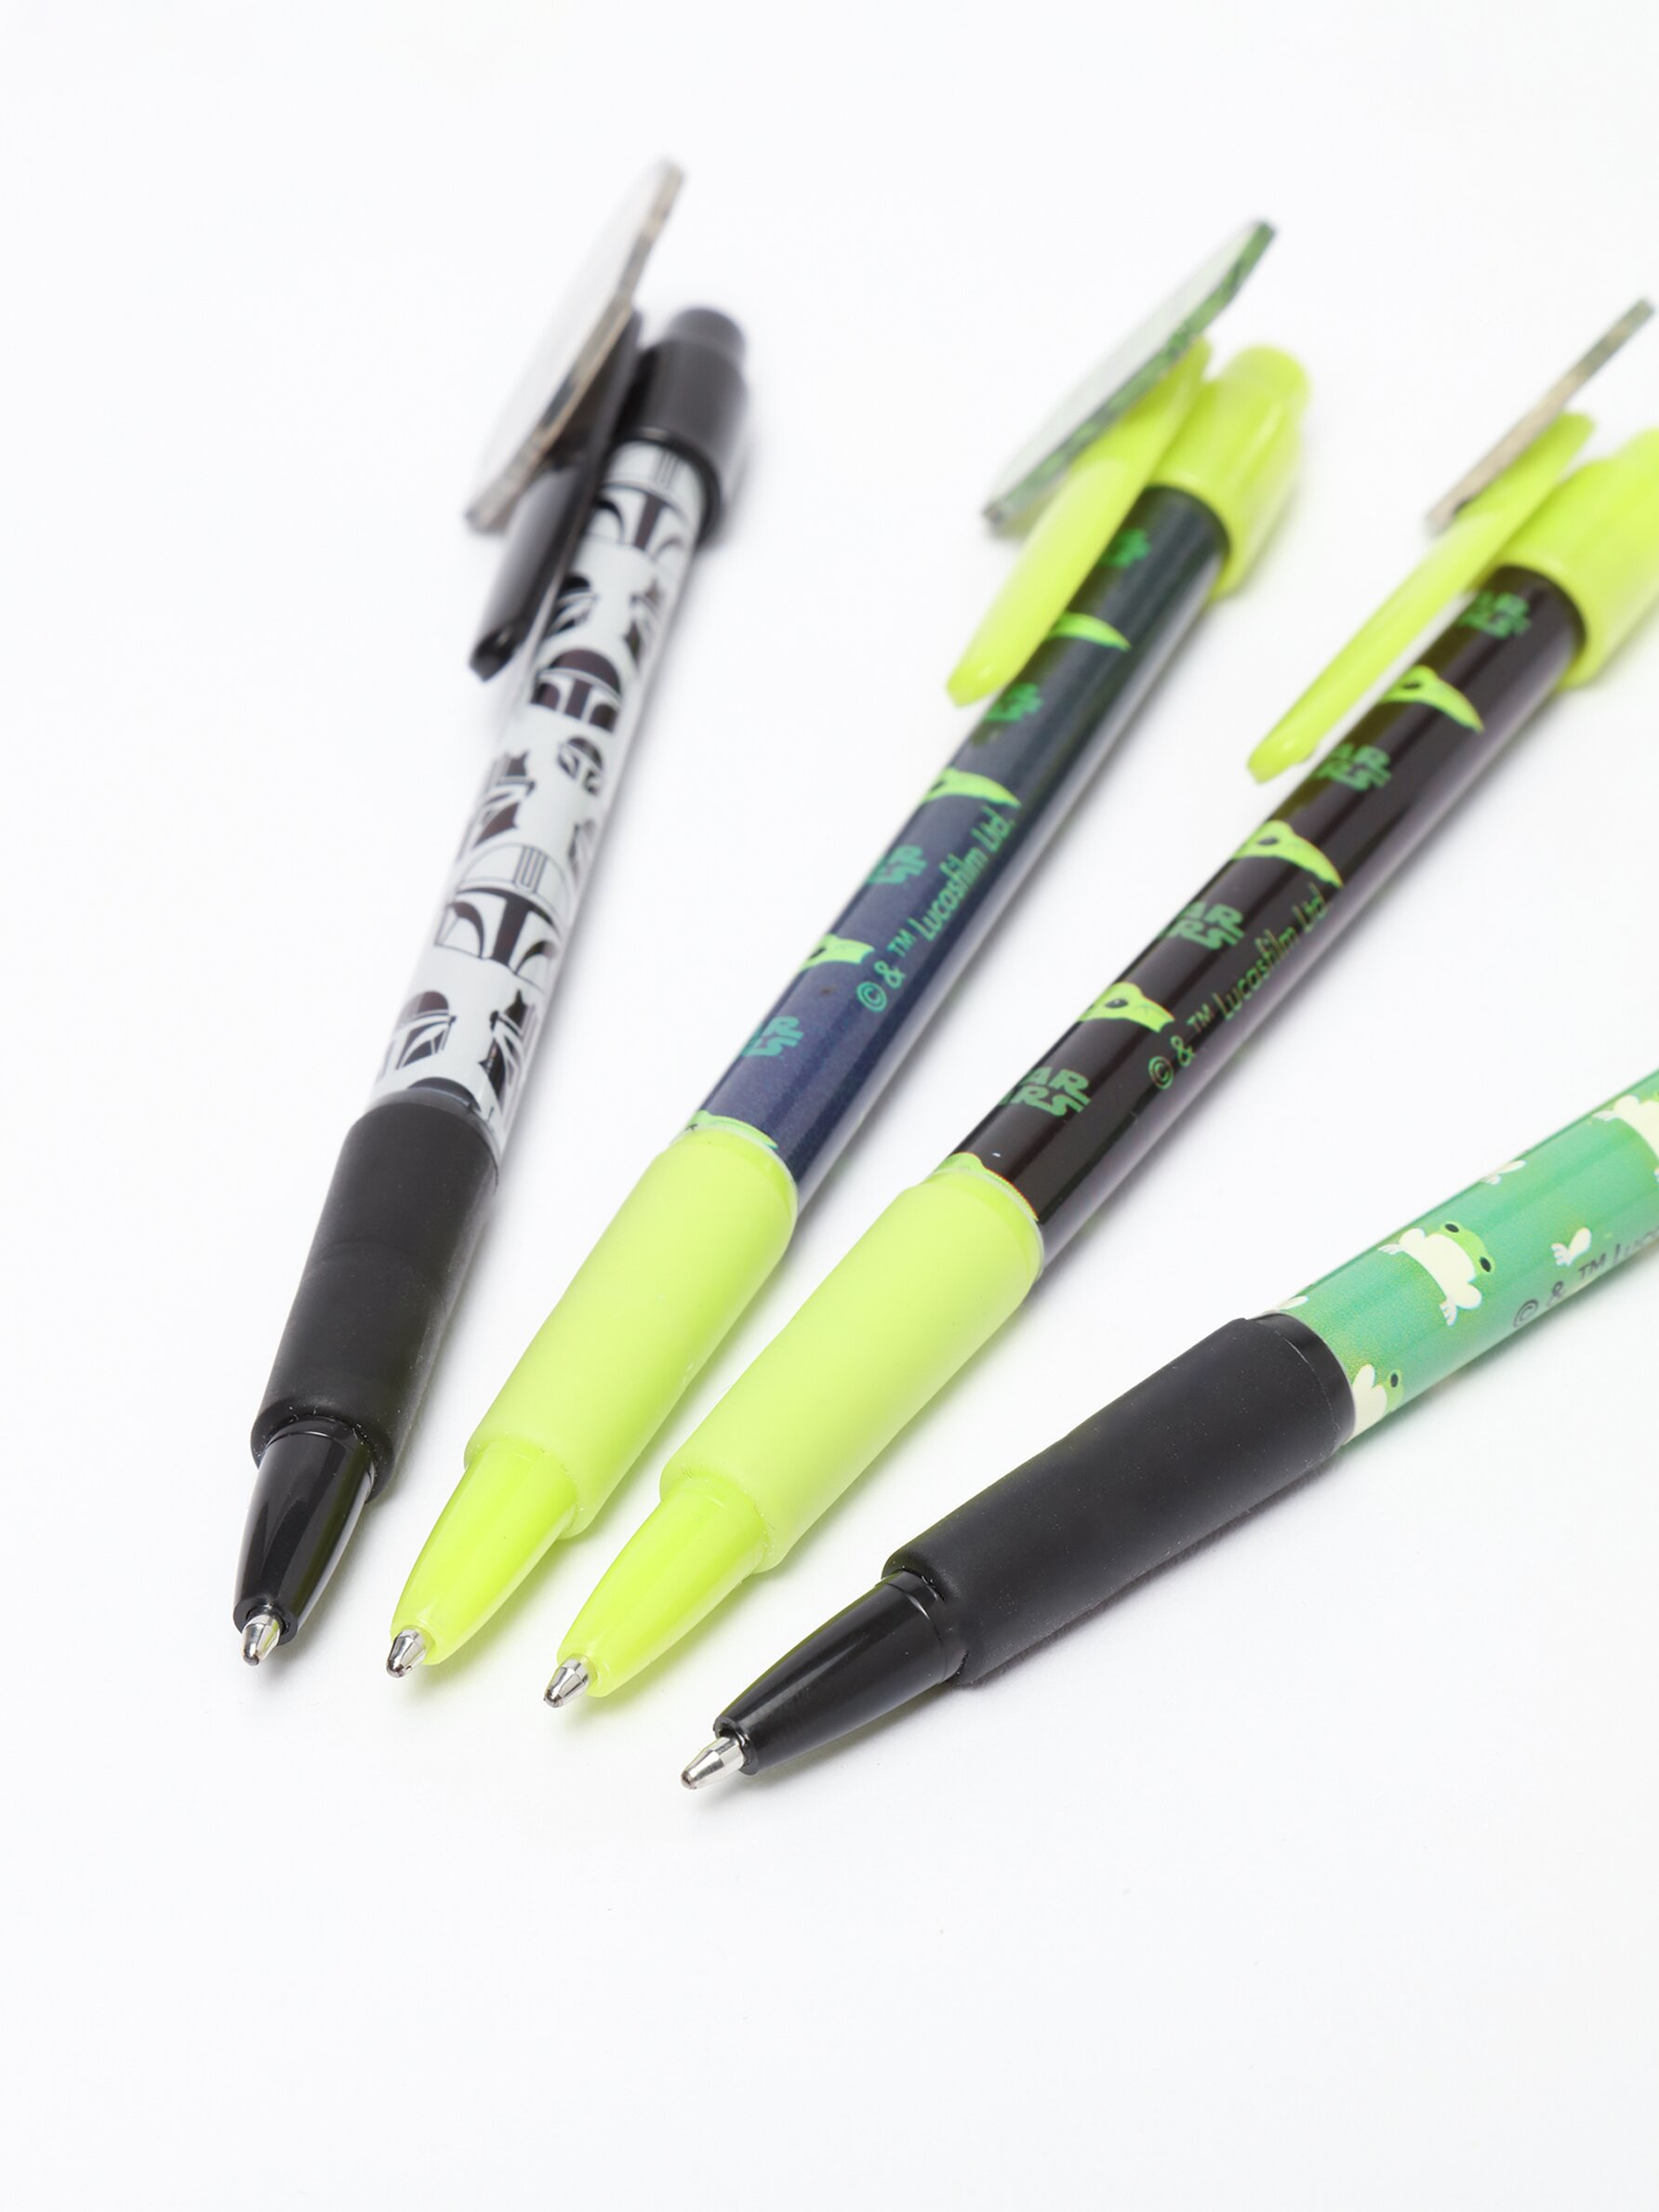 Pack of 4 Baby Yoda Star Wars ©Disney pens - Collabs - ACCESSORIES